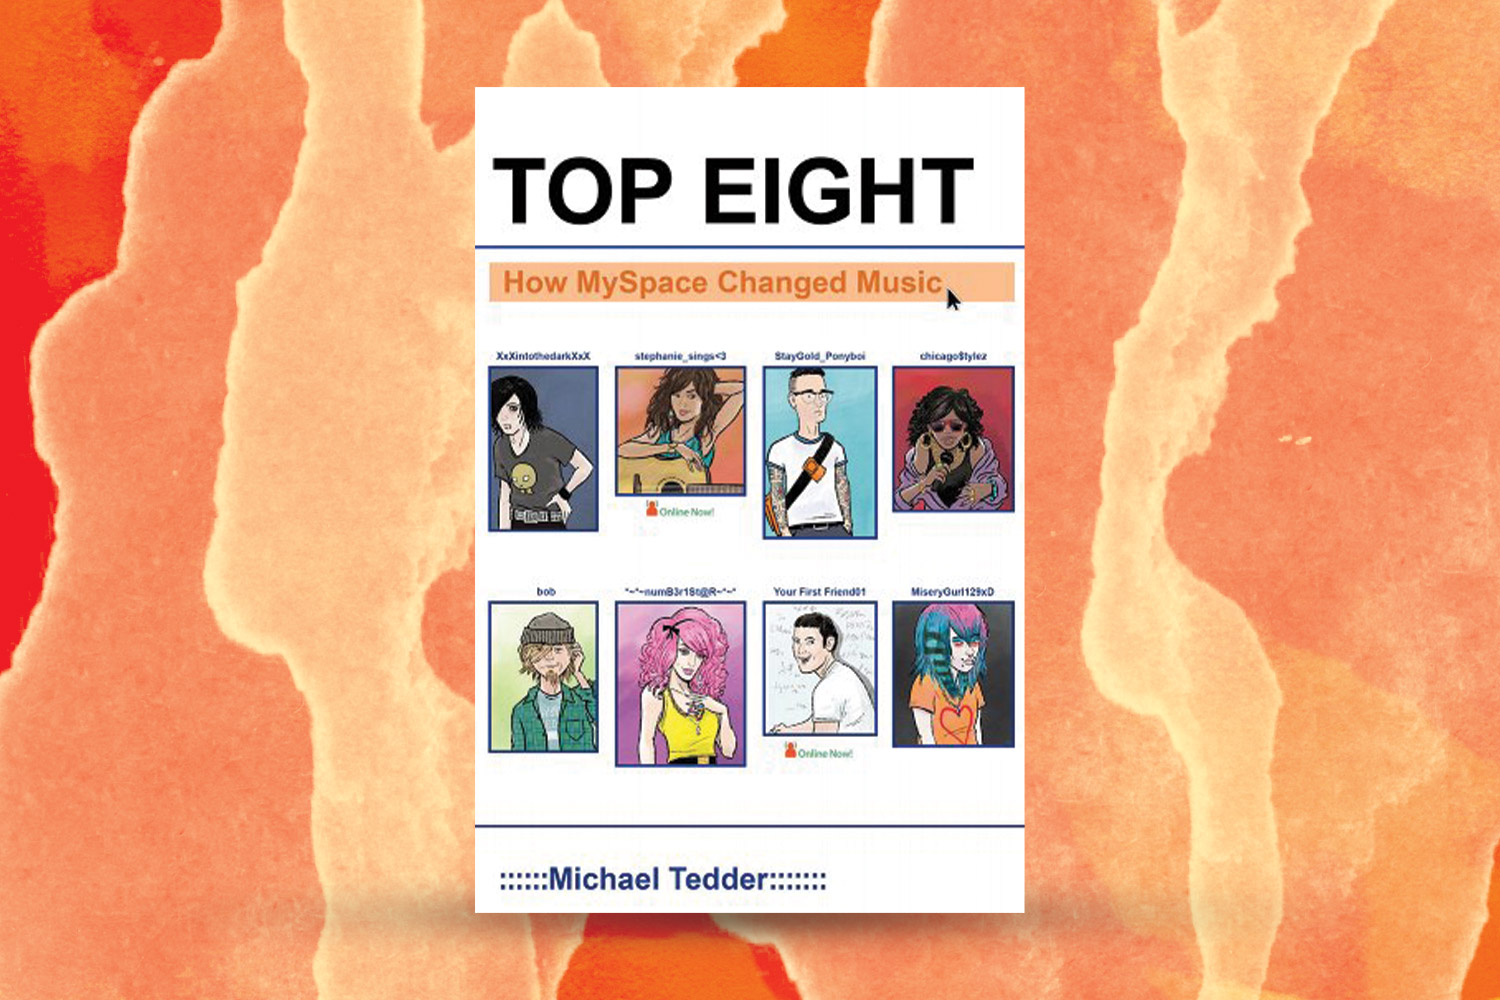 "Top Eight" cover